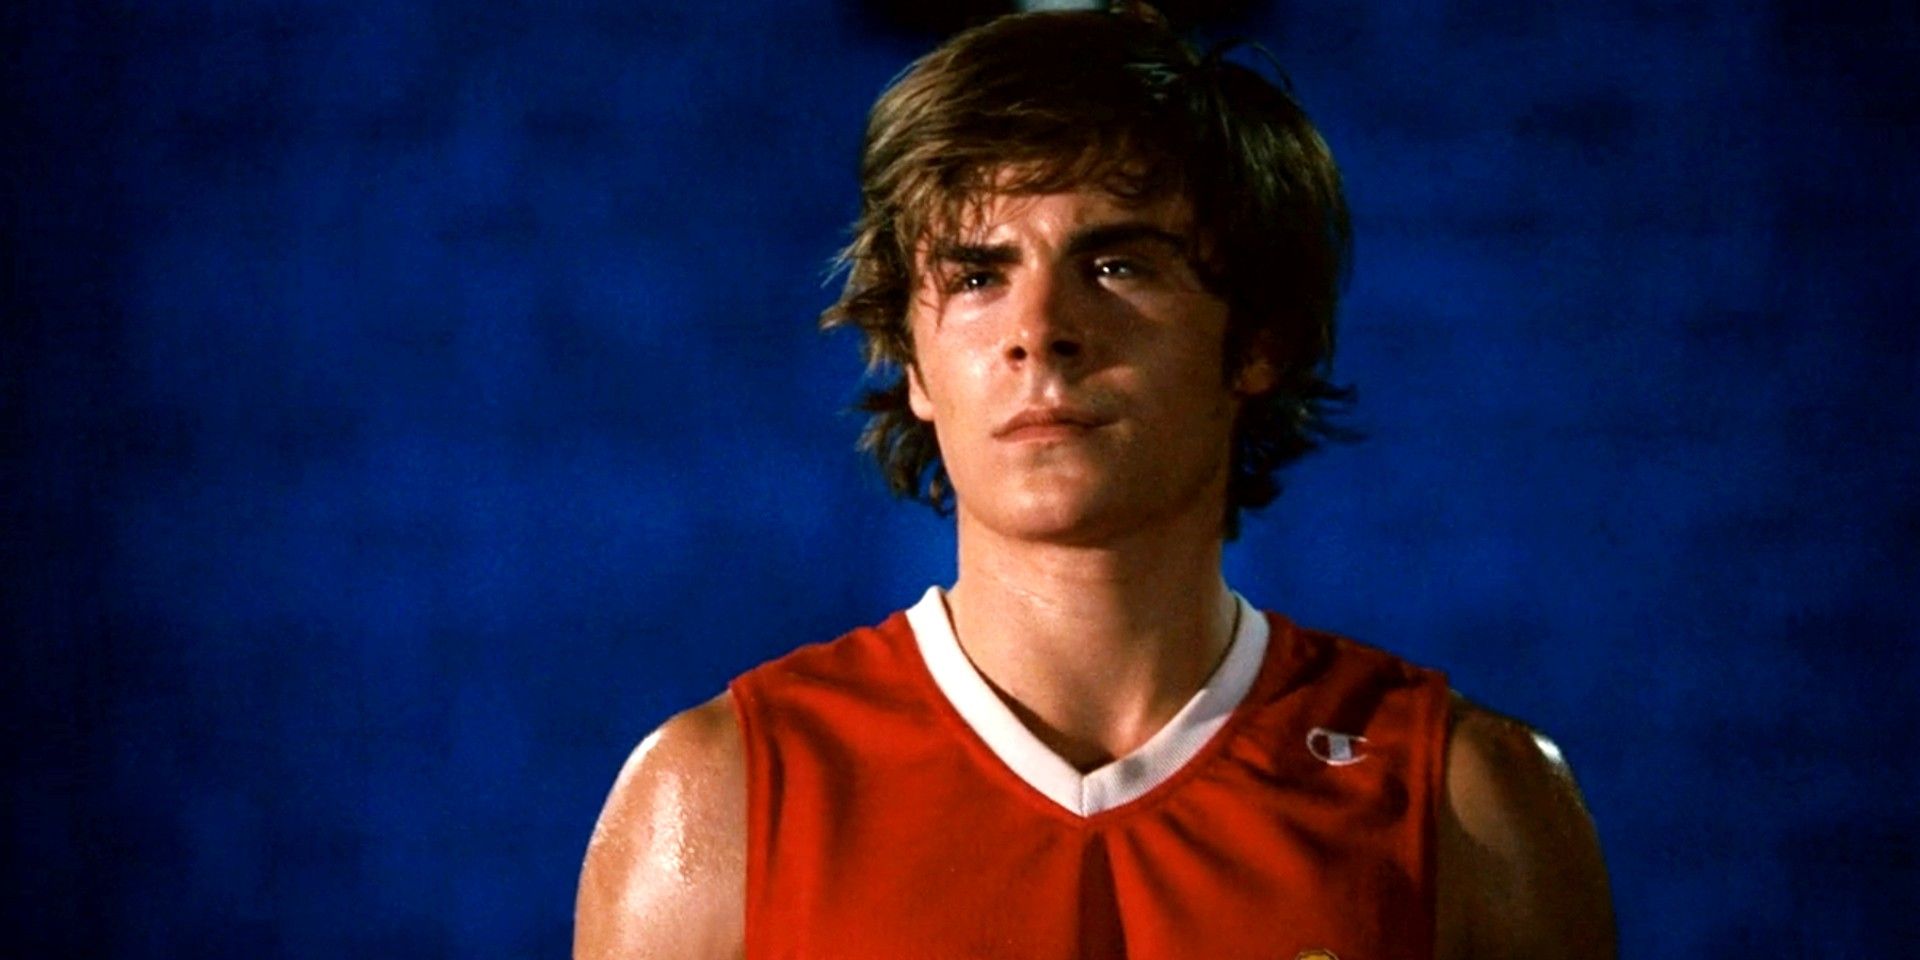 Troy Bolton on the drama stage in High School Musical 3